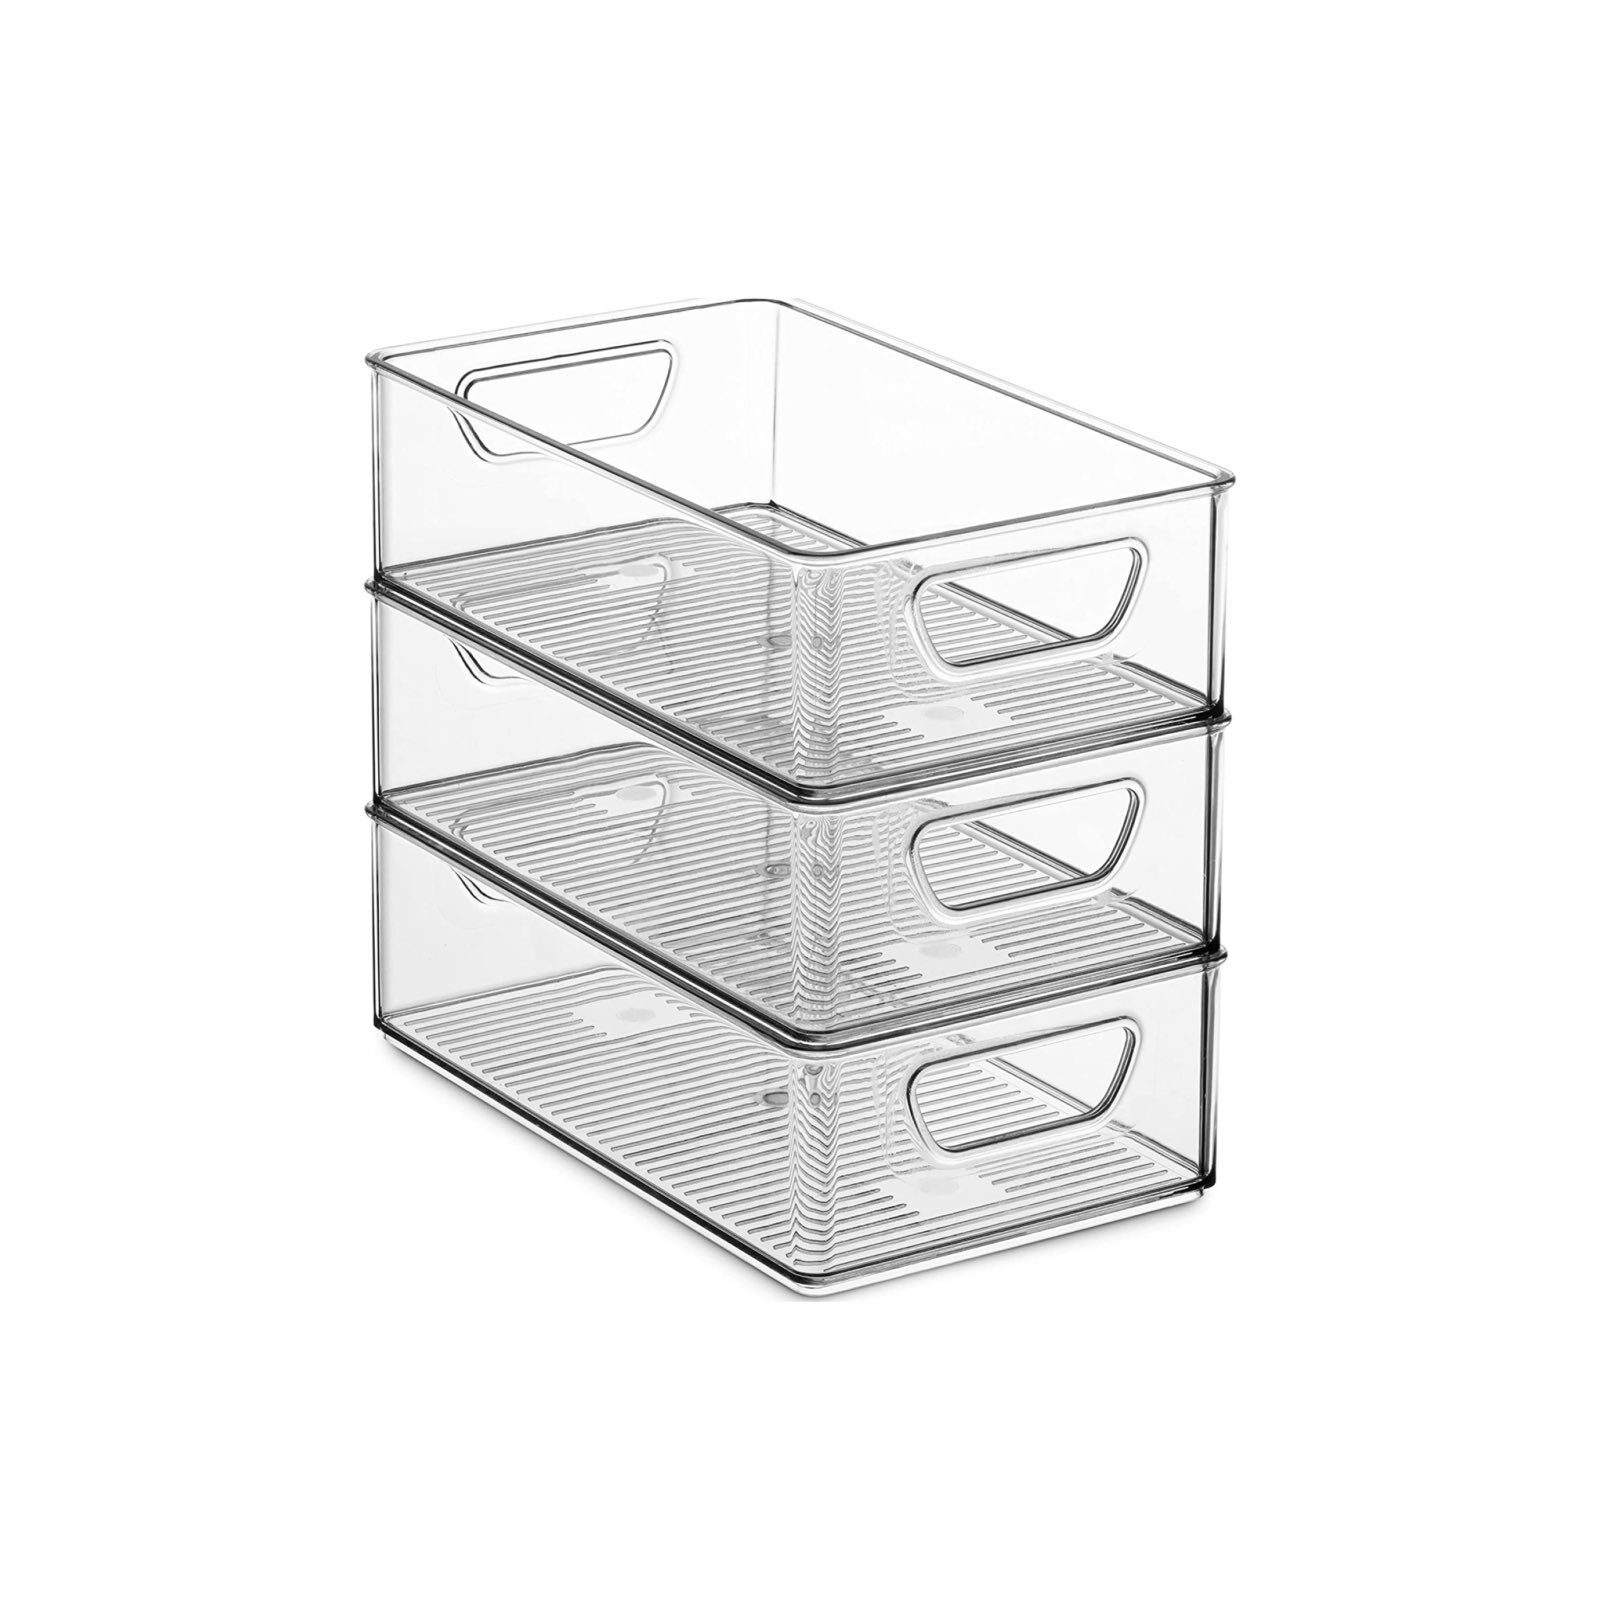 Home Organization Products I Have and Love, Starting at $11